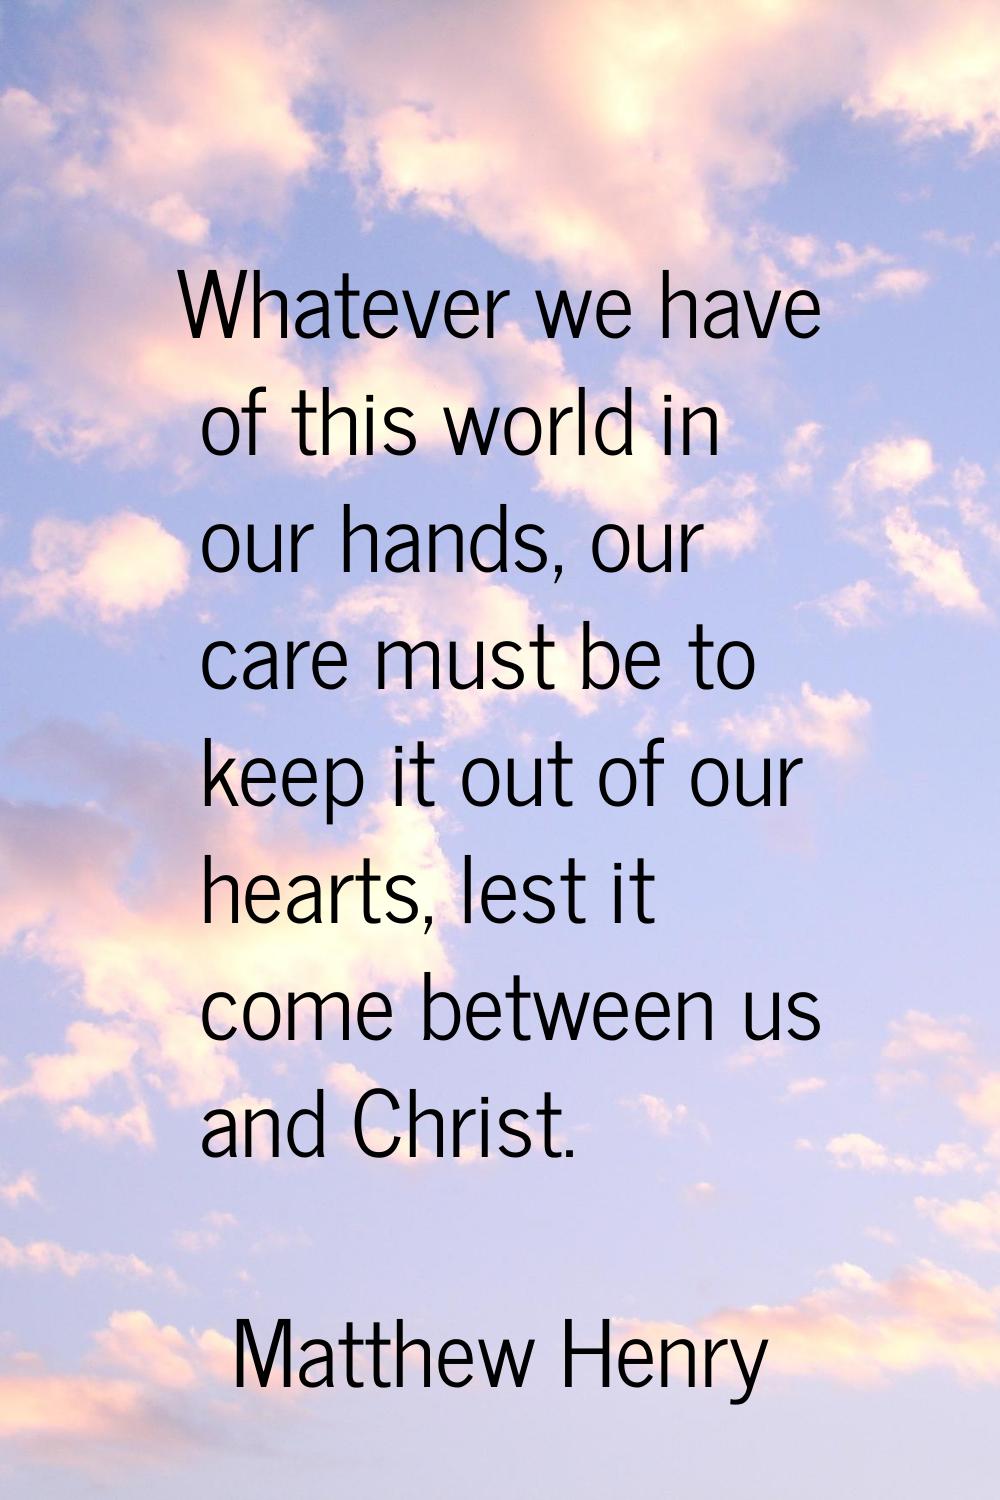 Whatever we have of this world in our hands, our care must be to keep it out of our hearts, lest it